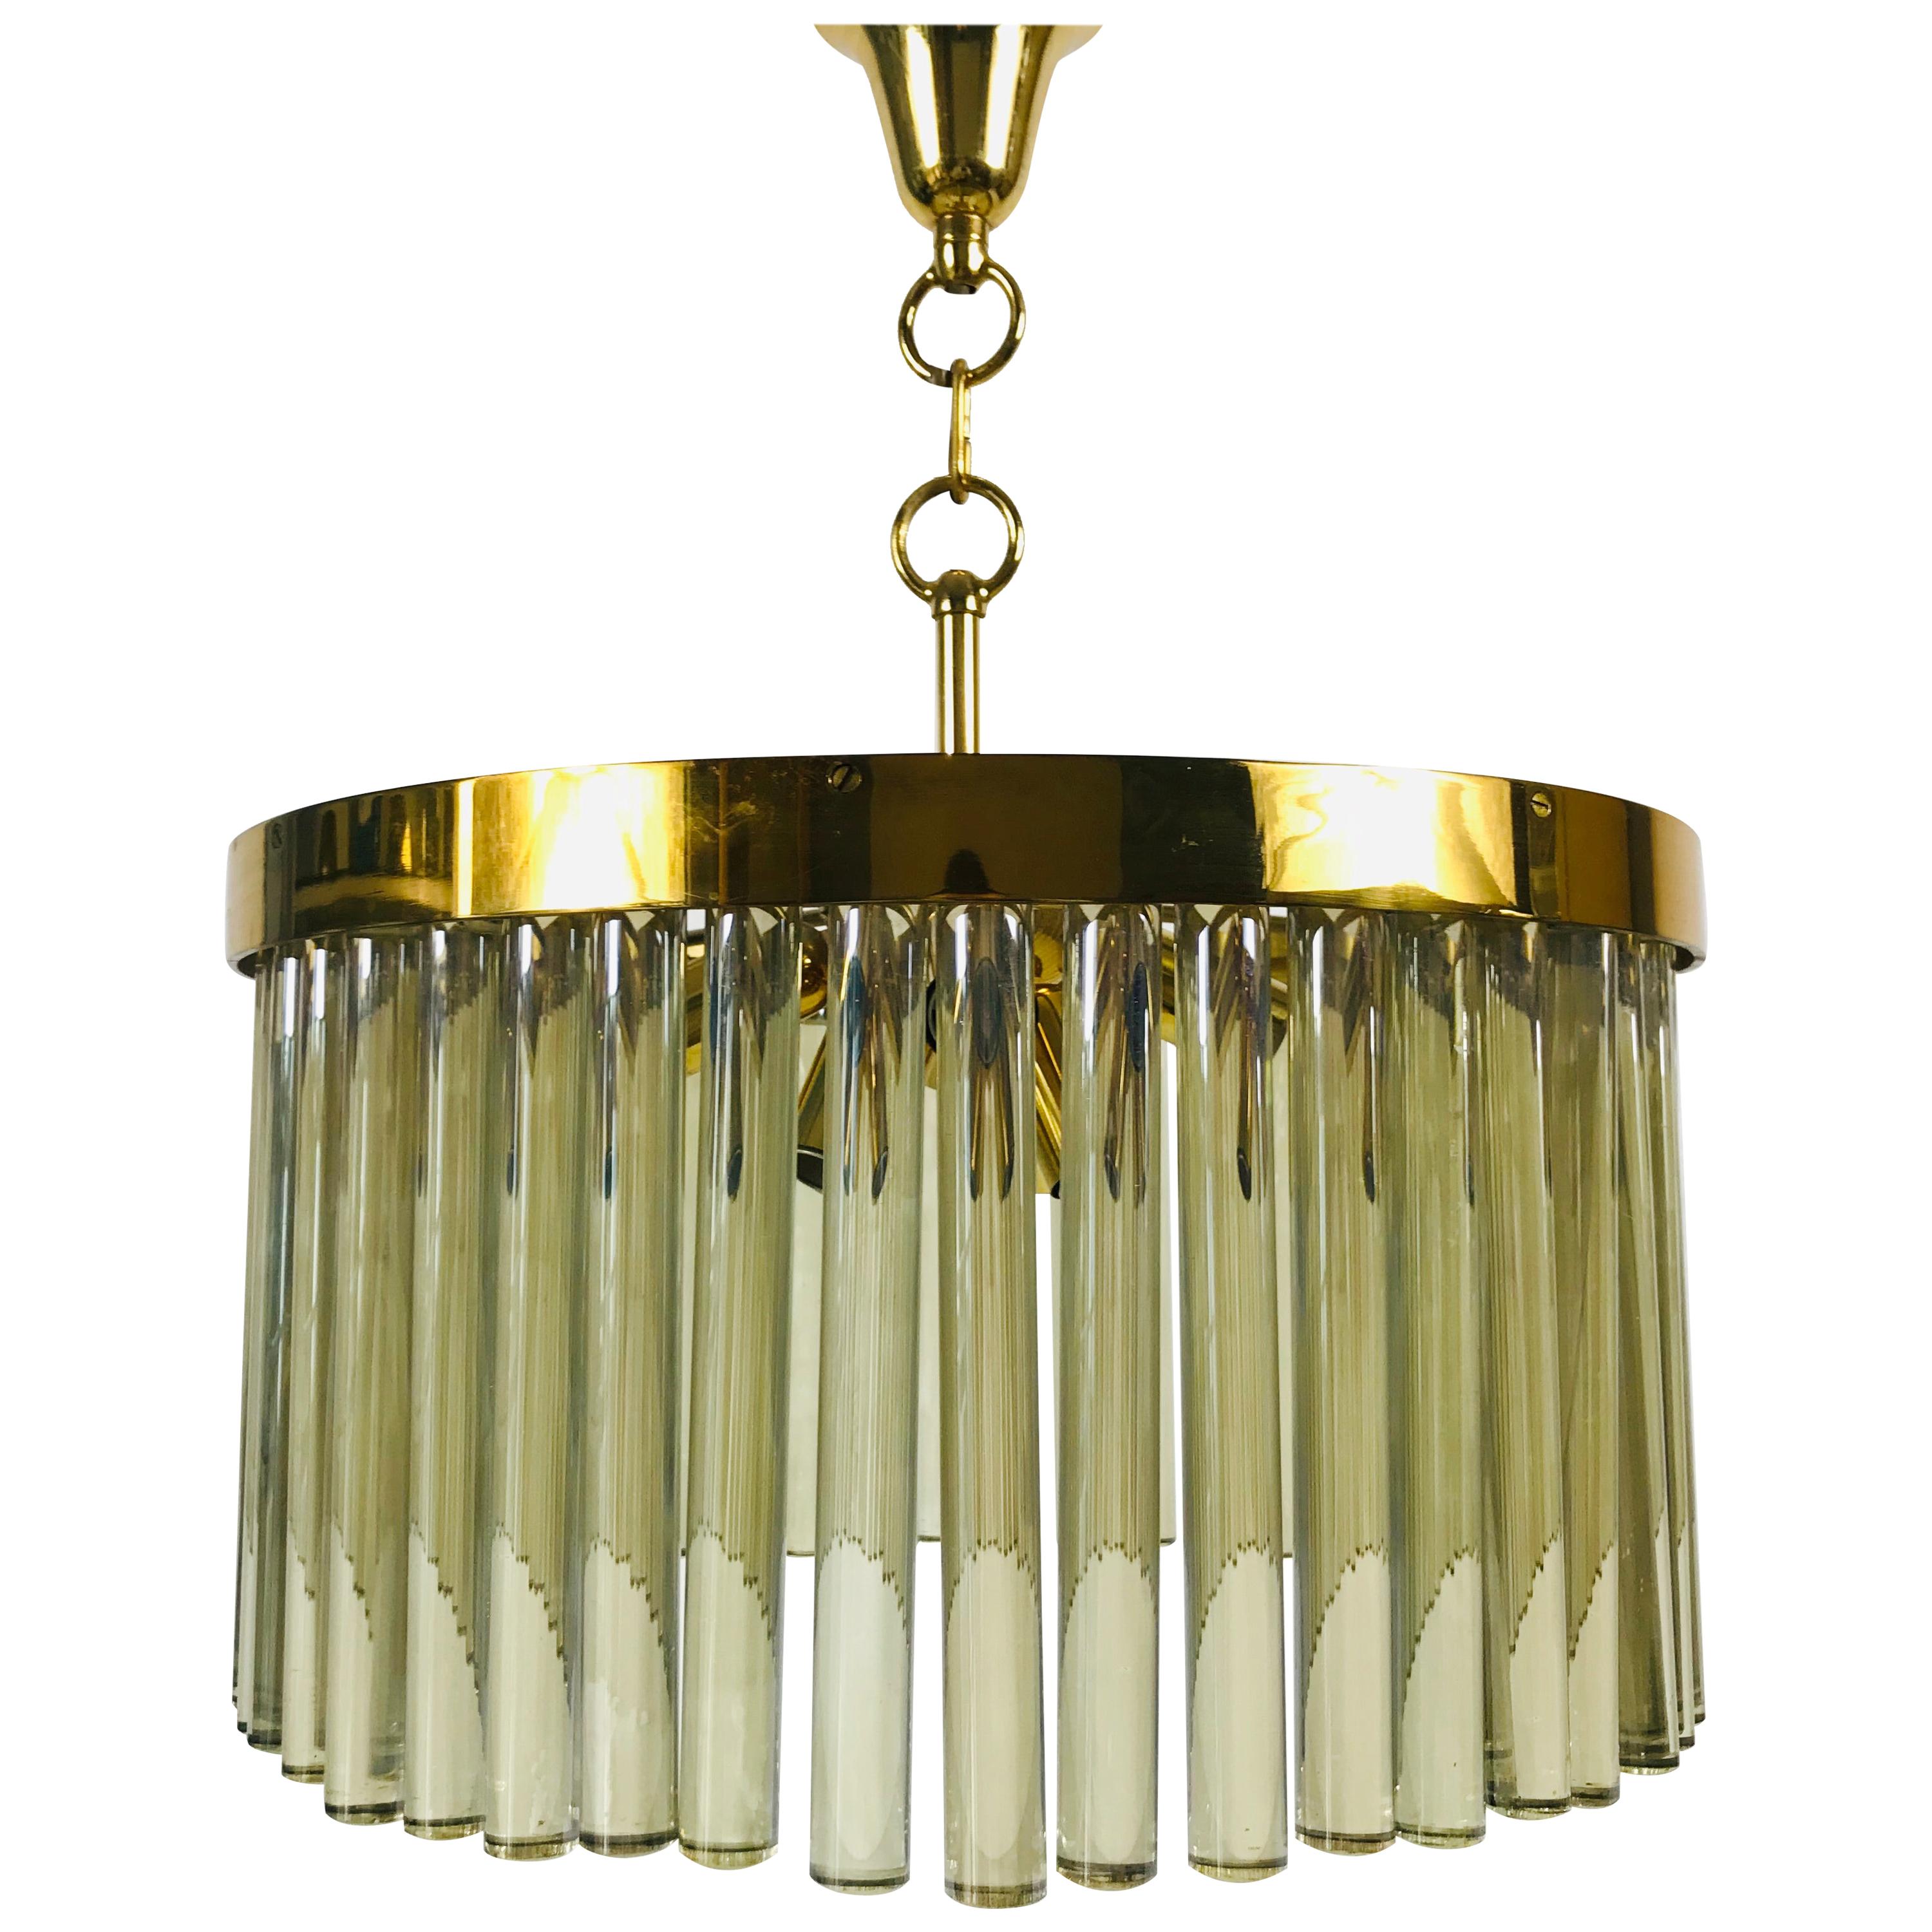 1 of 2 Golden Gilded Brass and Crystal Glass Chandelier by Christoph Palme, 1960 For Sale